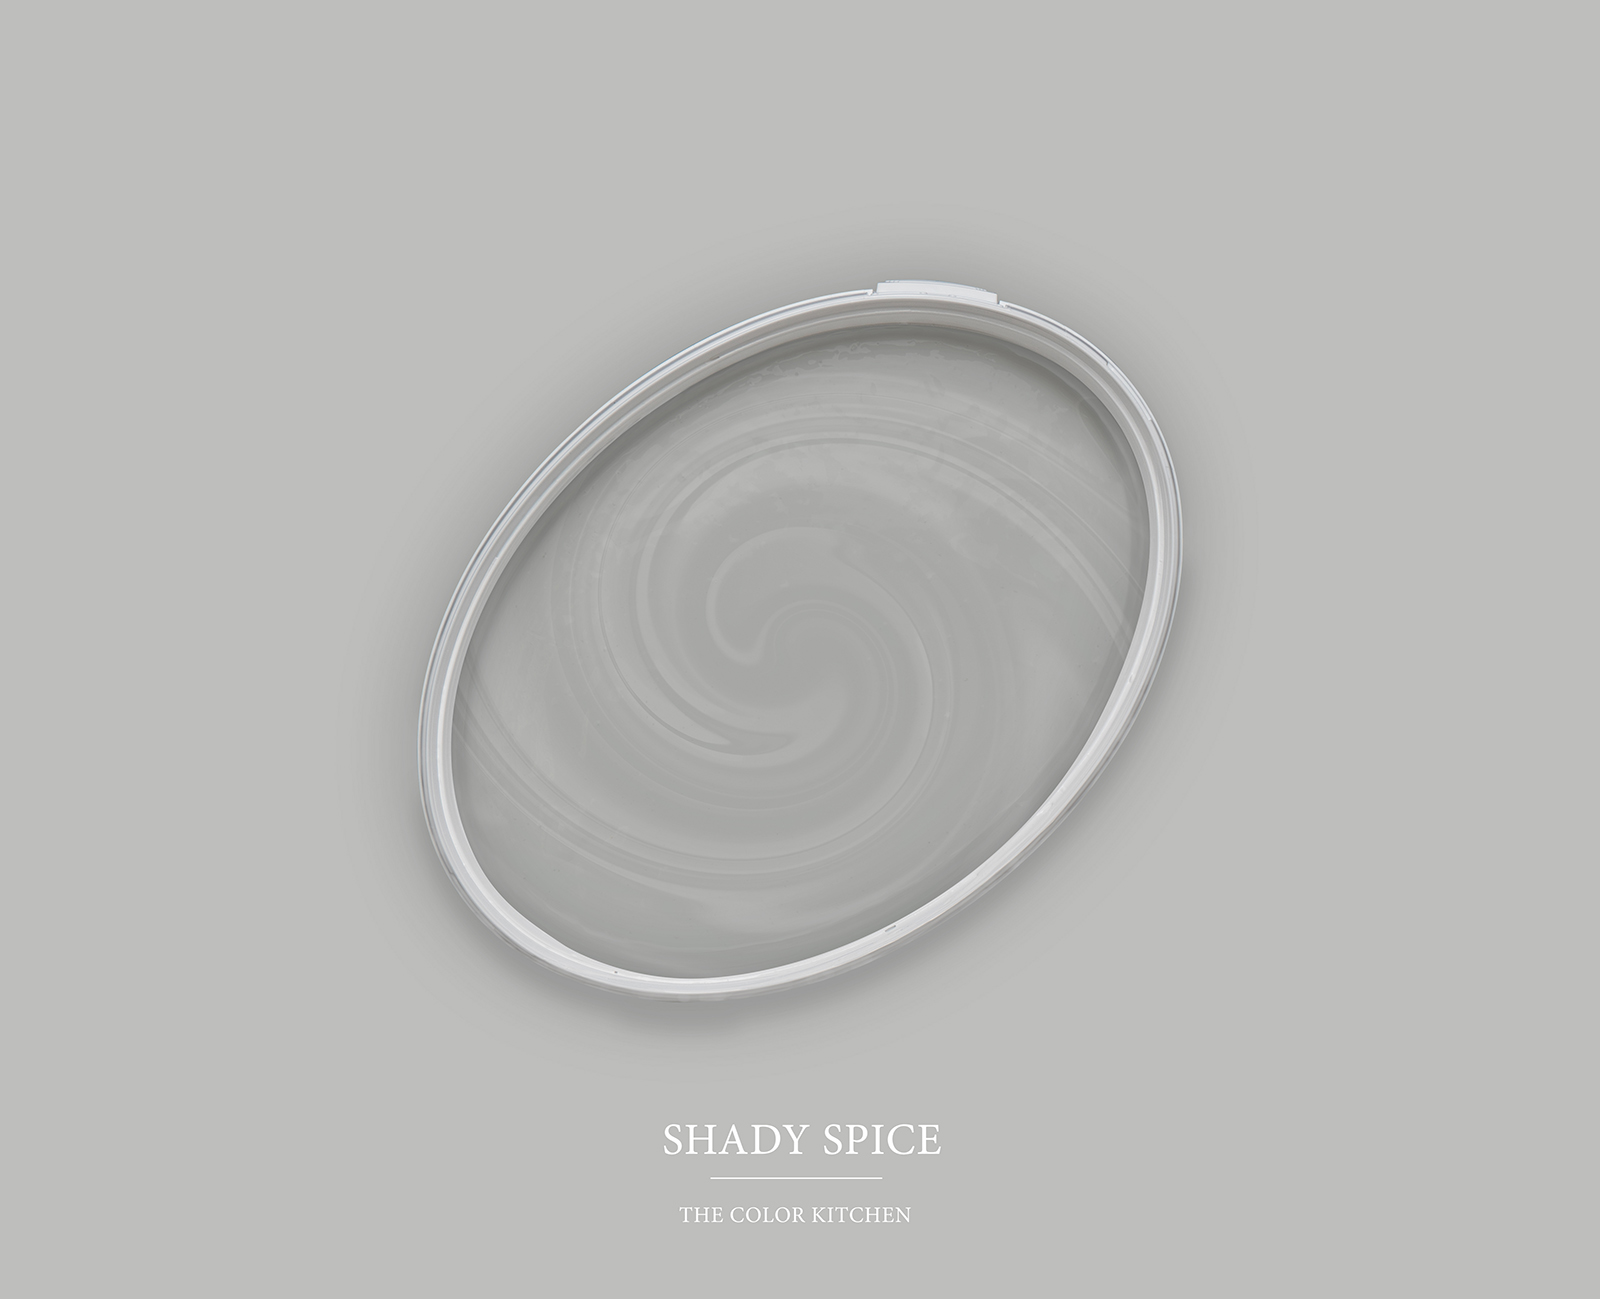         Wall Paint TCK1004 »Shady Spice« in cool grey – 2.5 litre
    